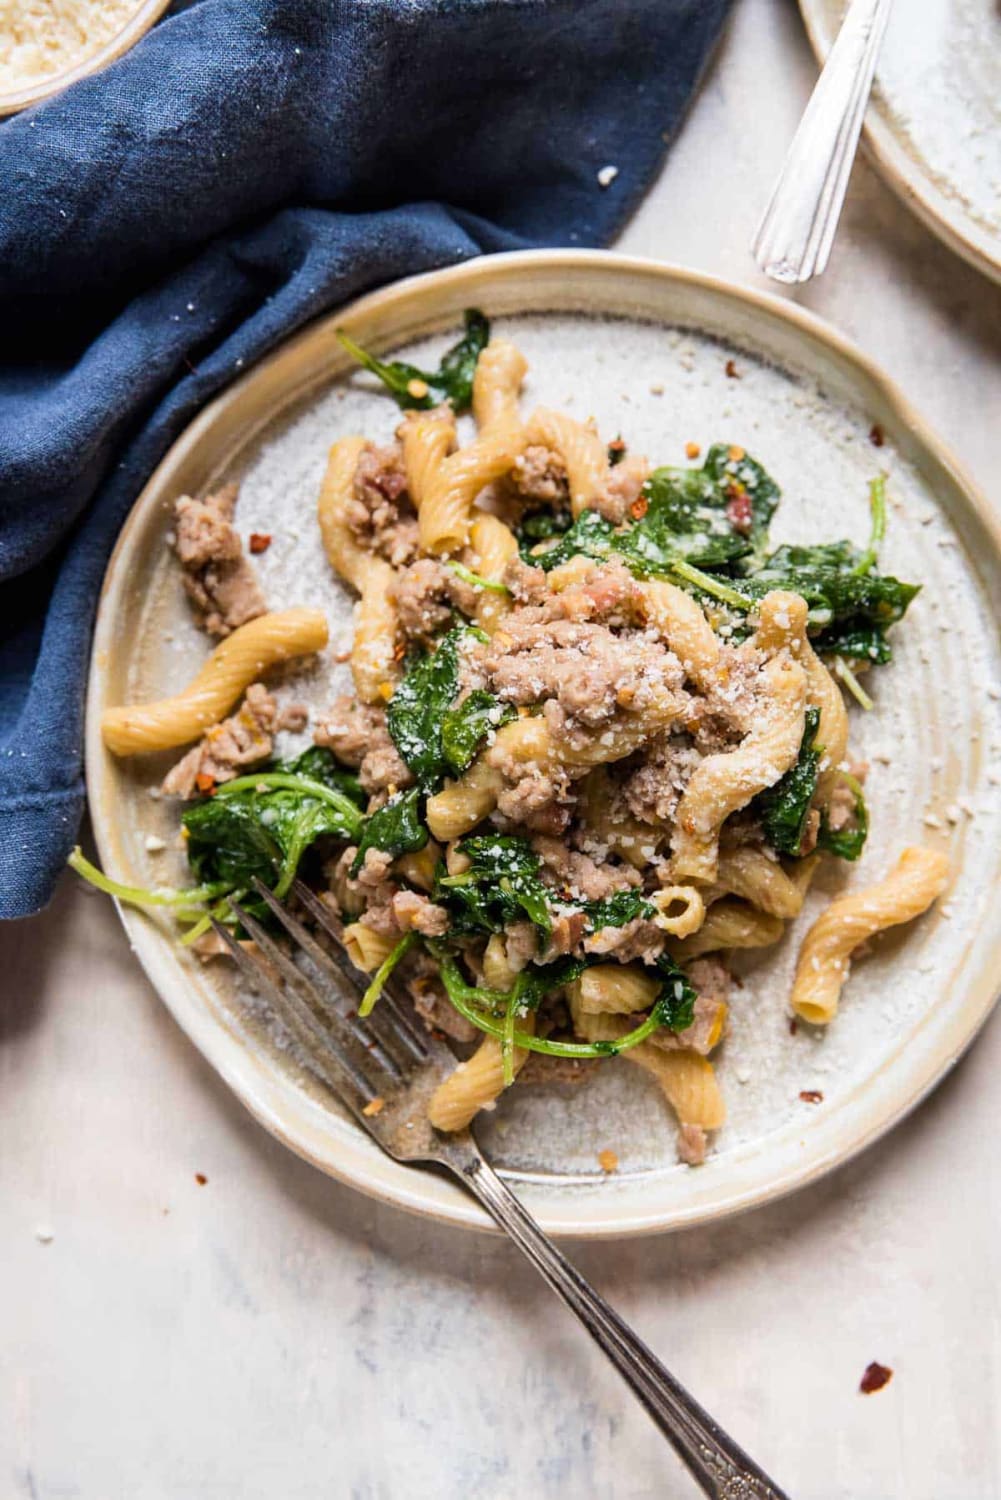 Chickpea Pasta with Sausage and Kale